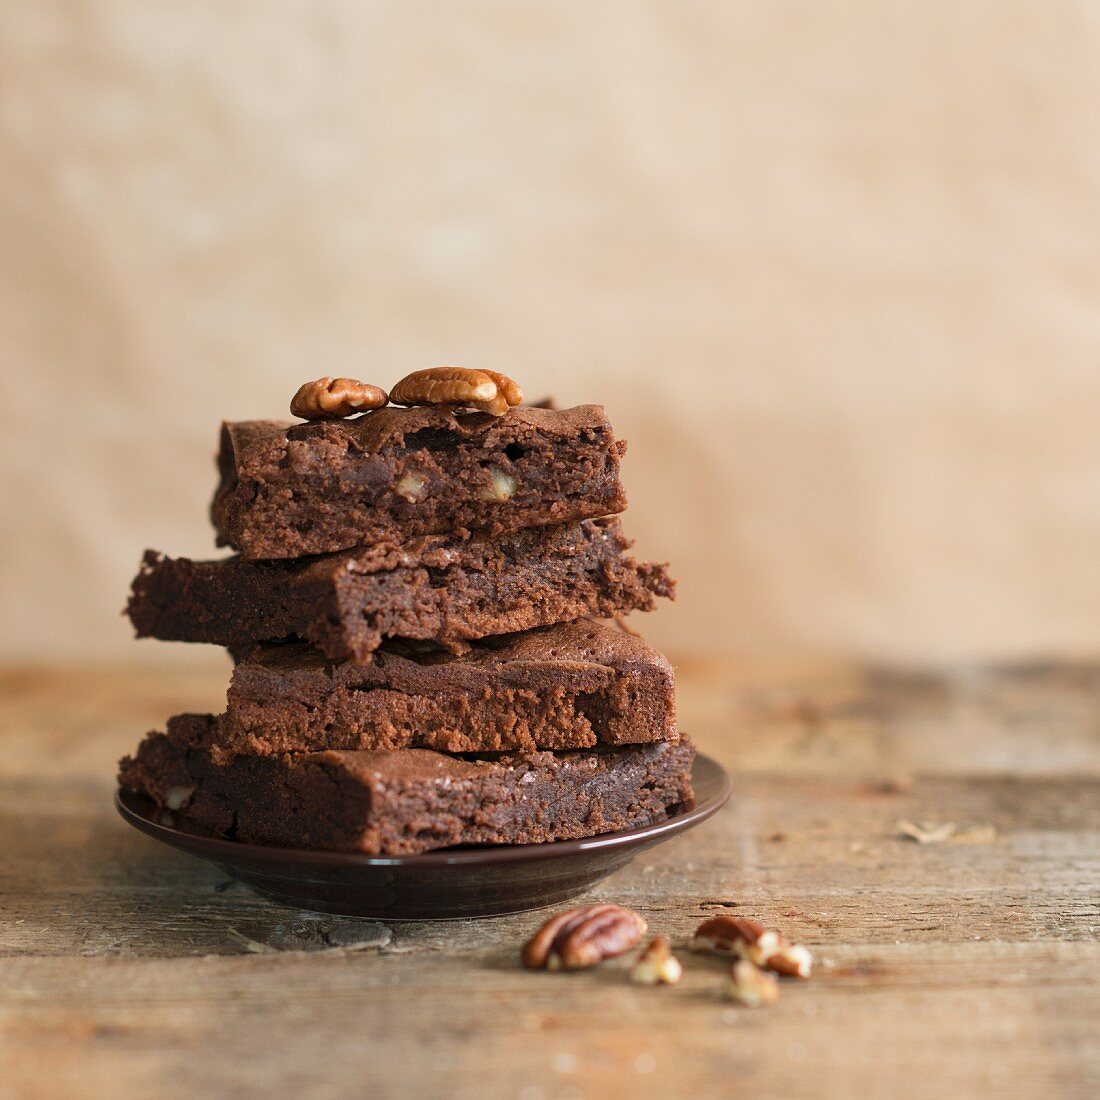 A stack of pecan nut chocolate brownies